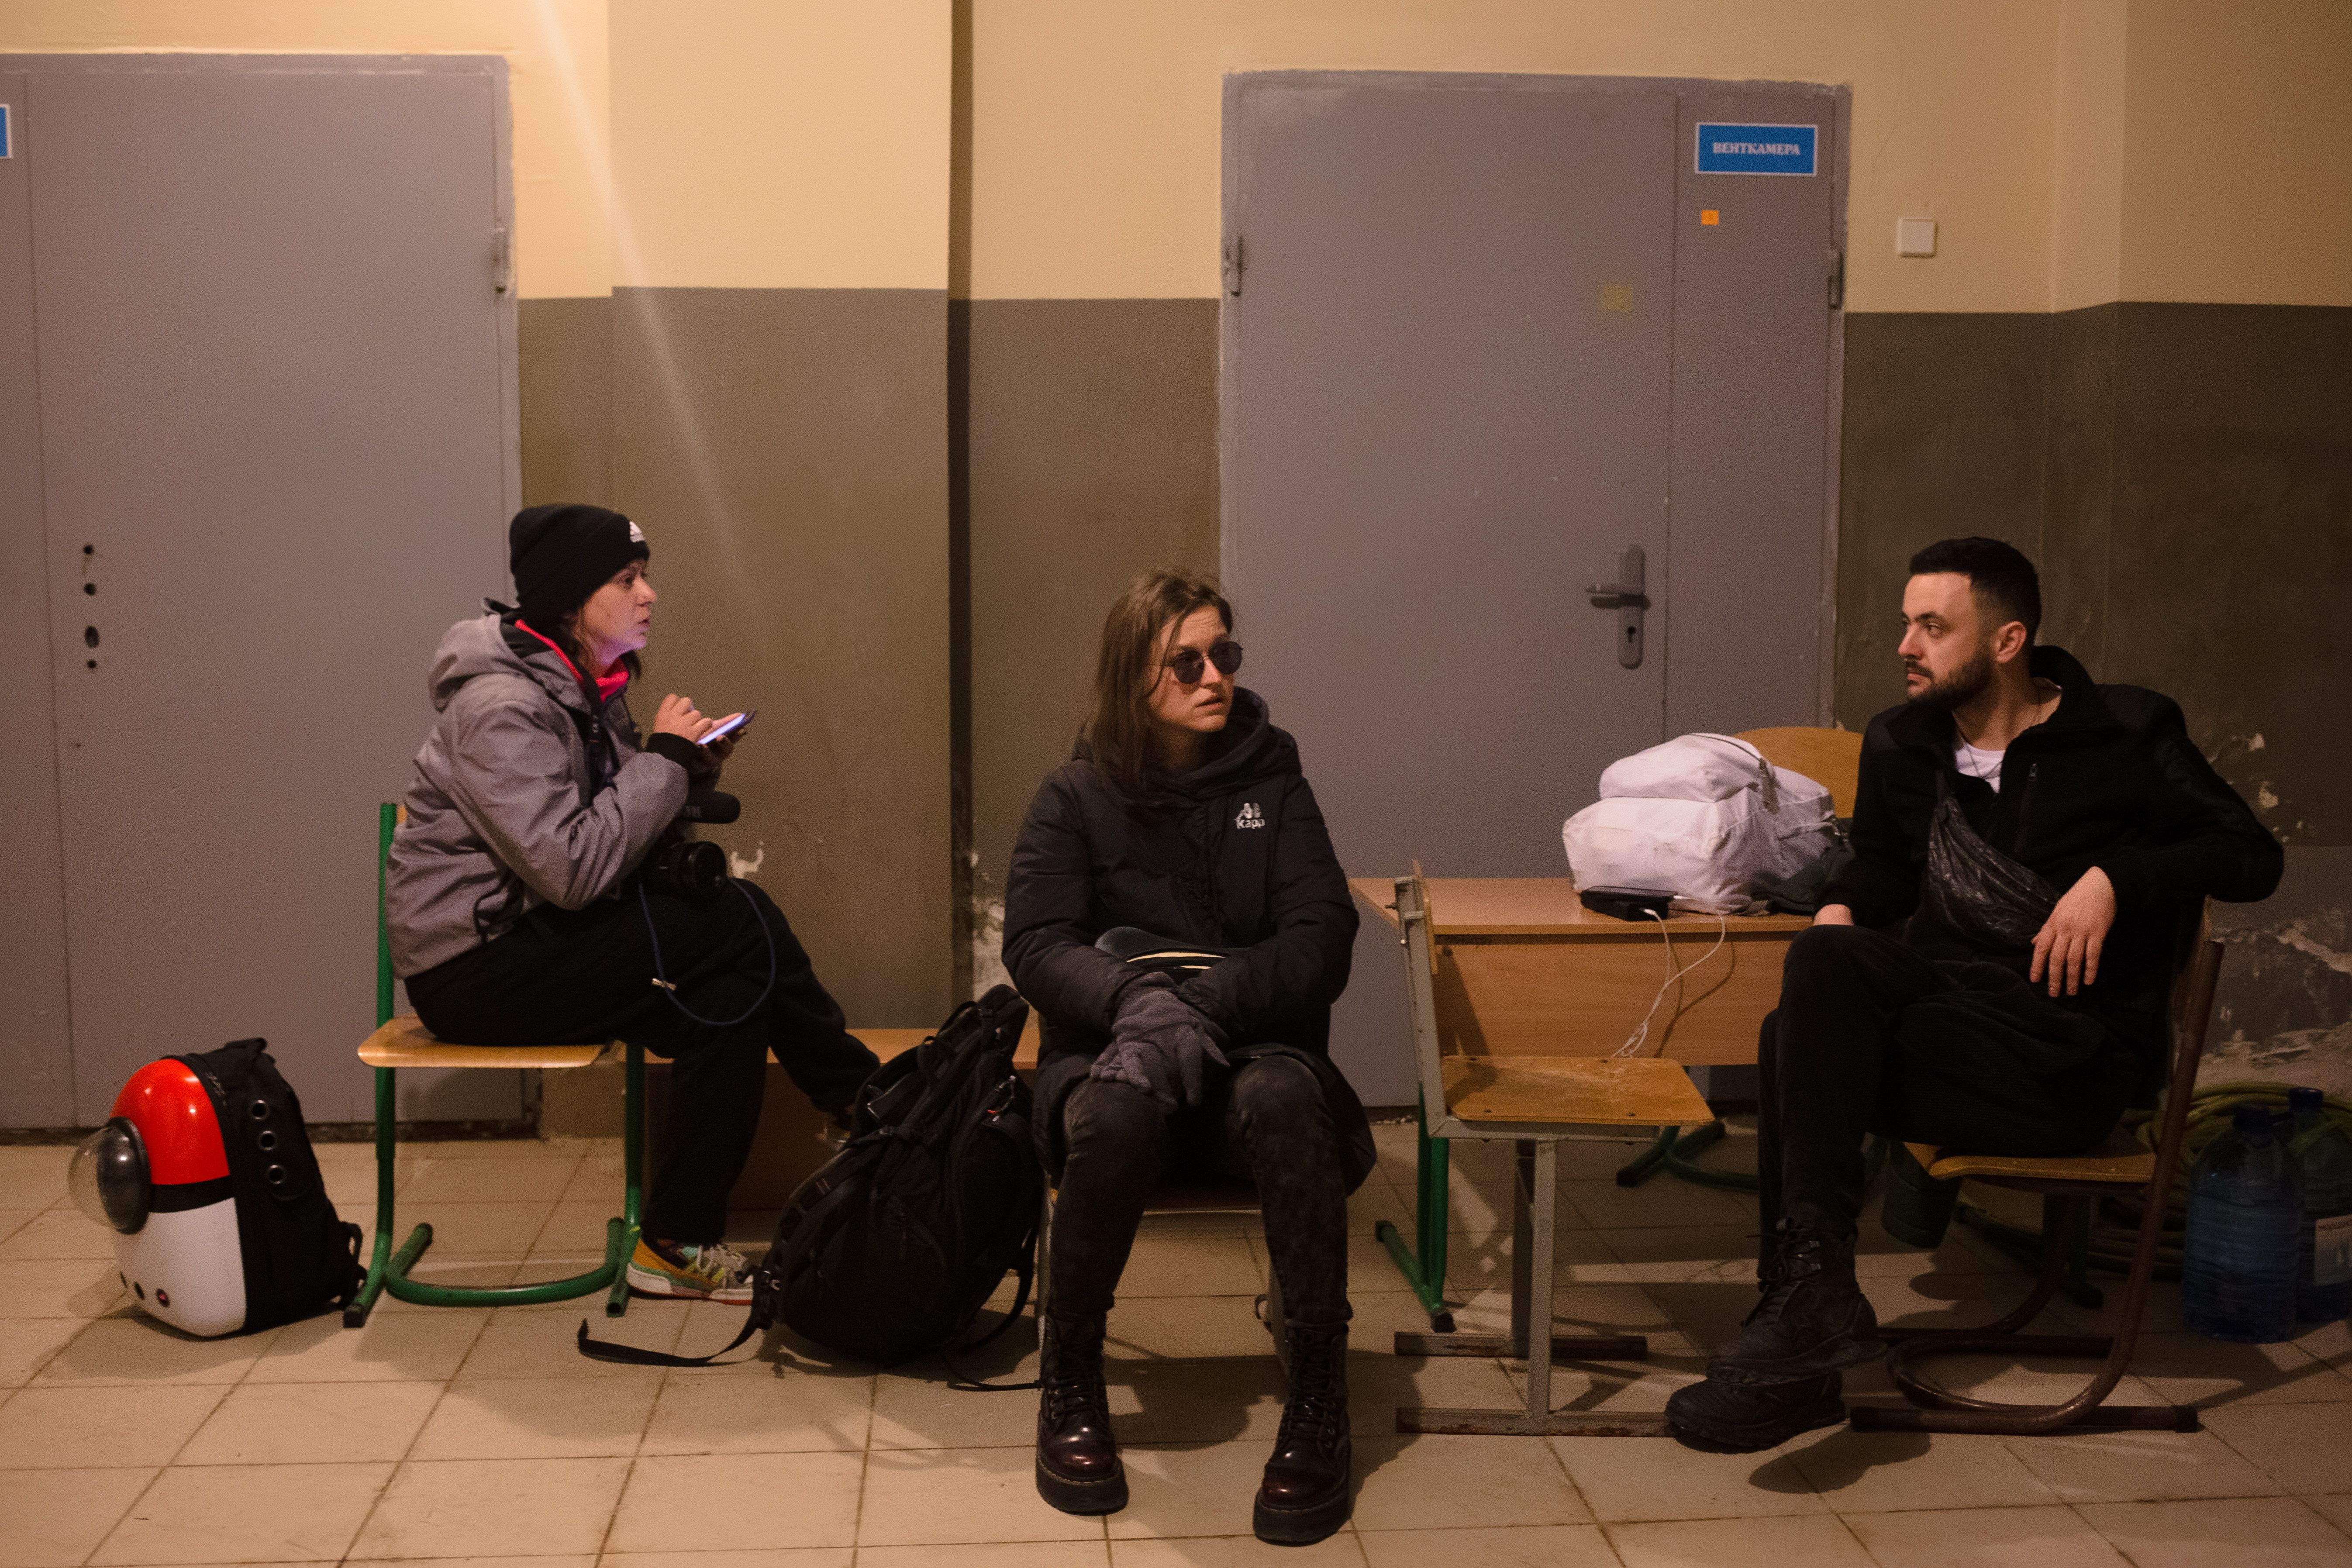 Kyiv residents wait for an air raid to end in a bomb shelter on Feb. 26. Photo: Anastasia Vlasova/Getty Images